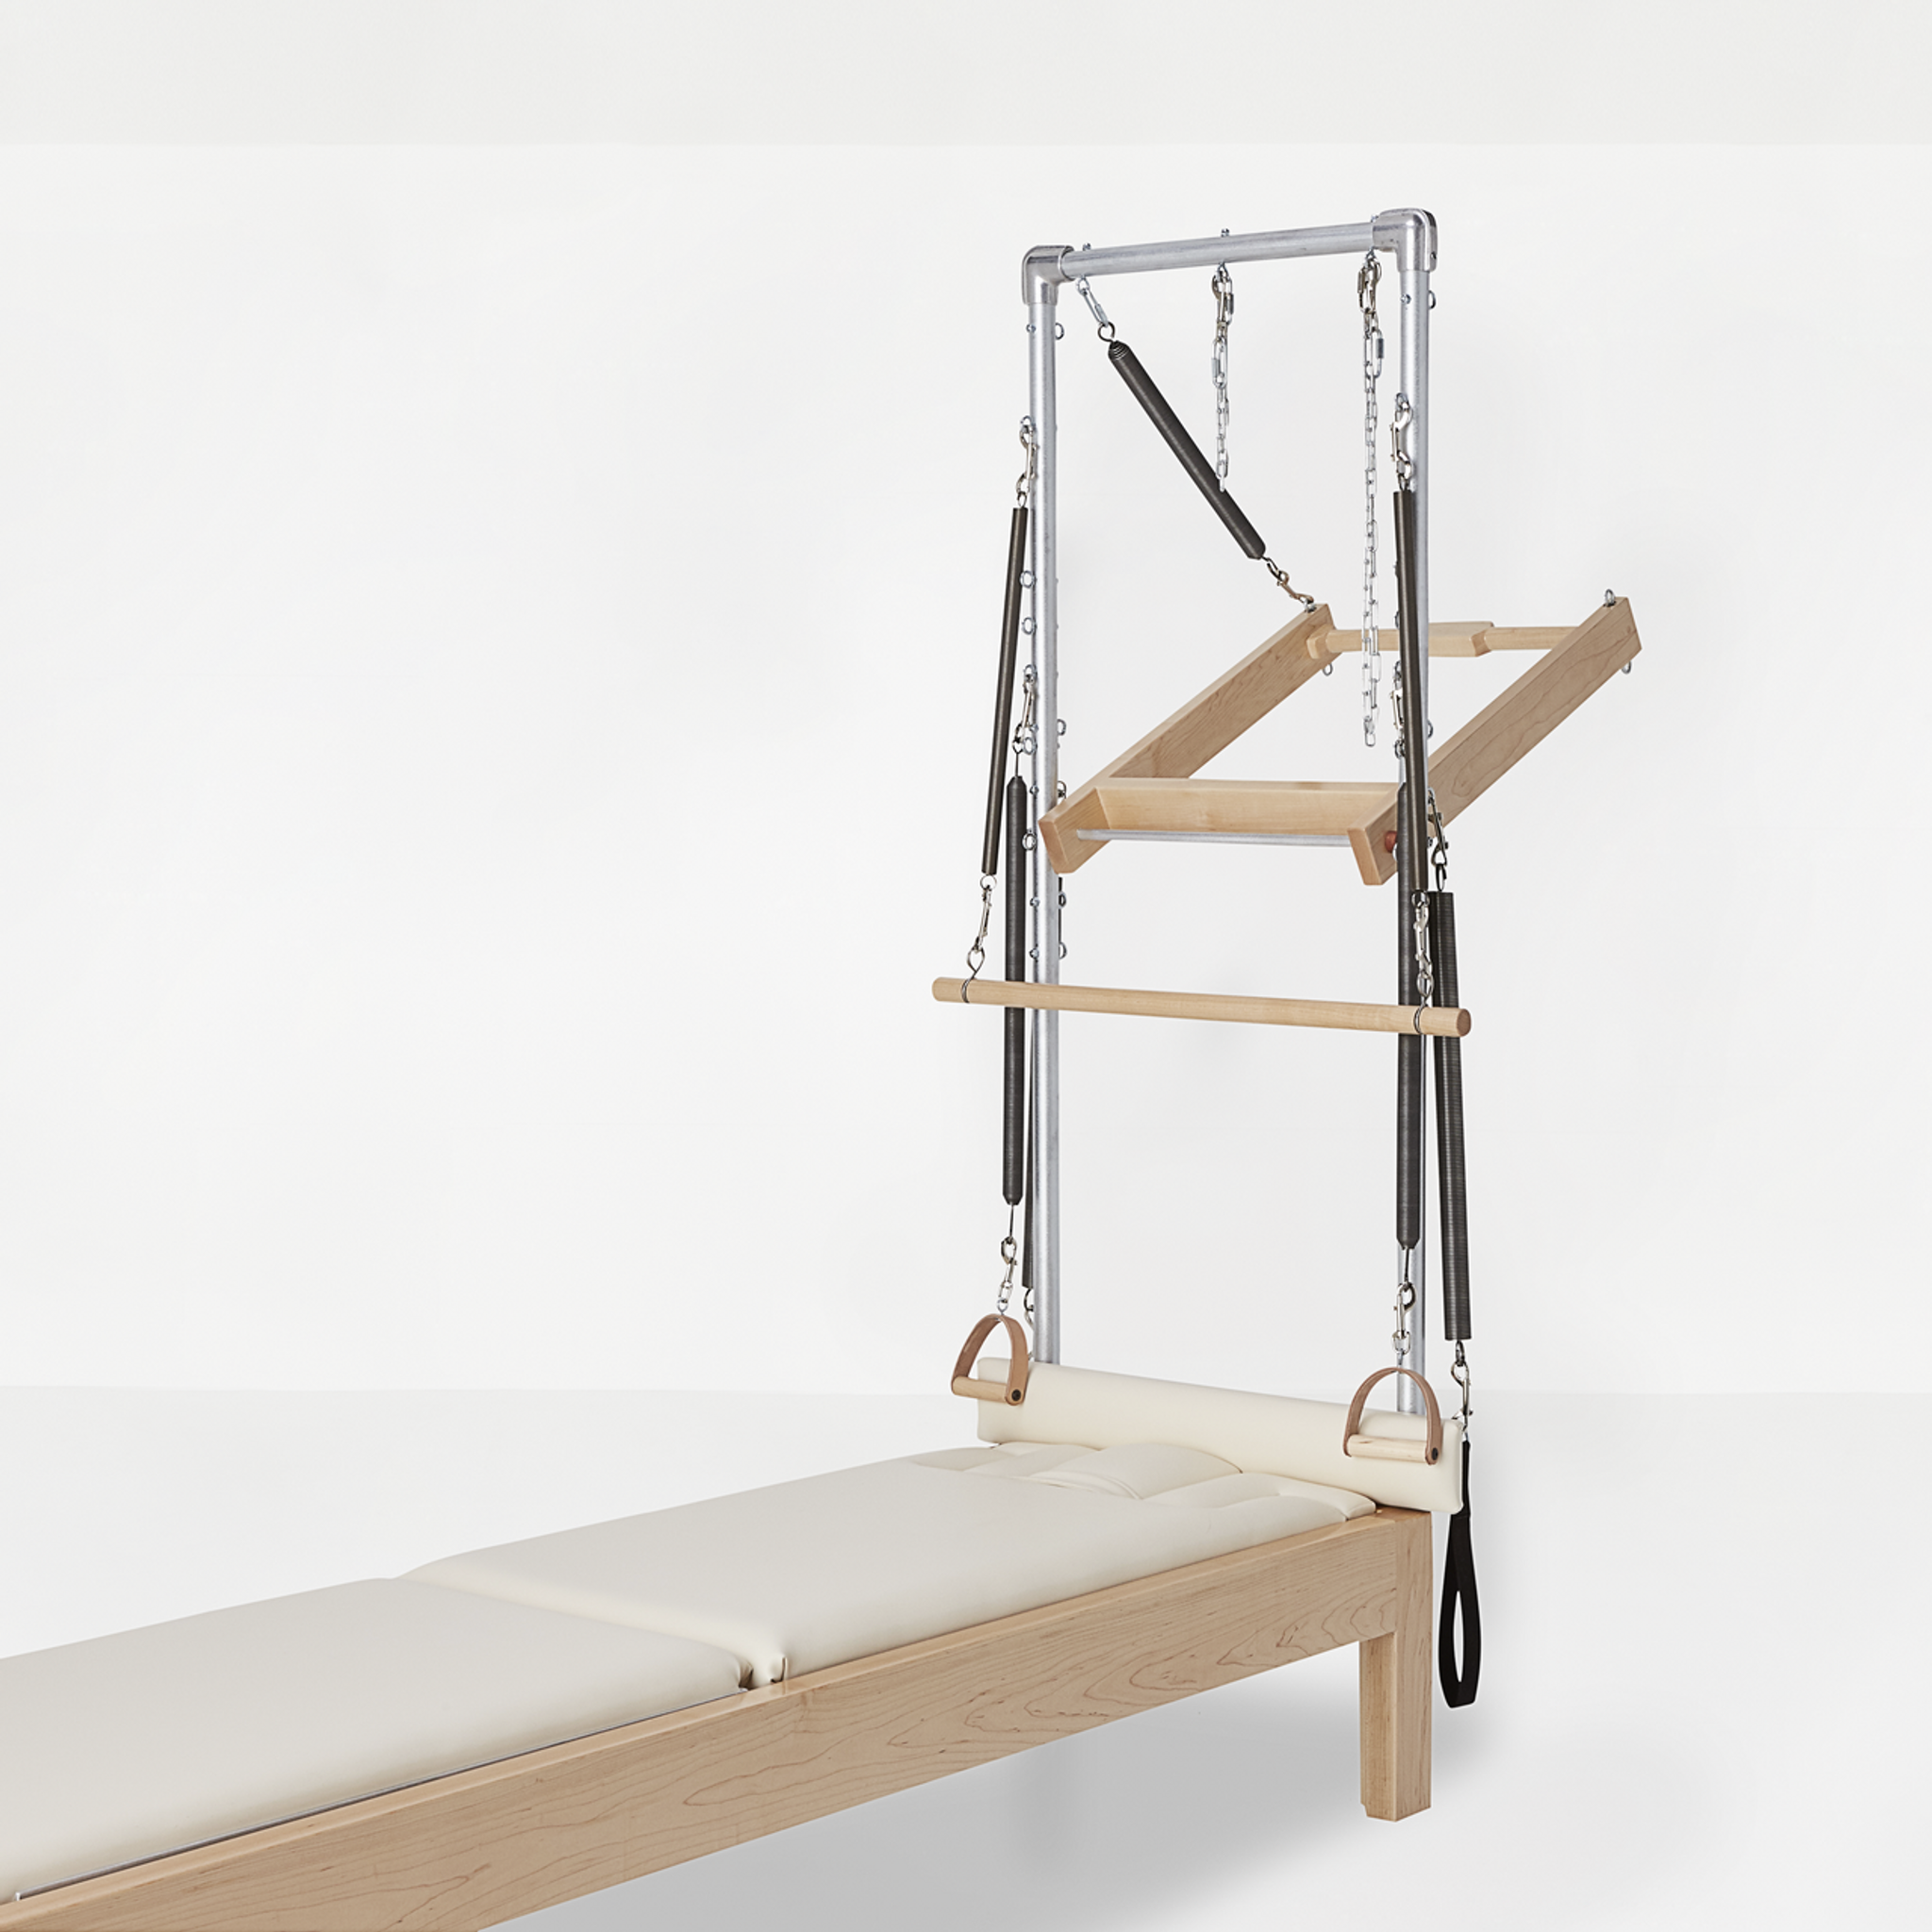 Add-on Tower for Reformer